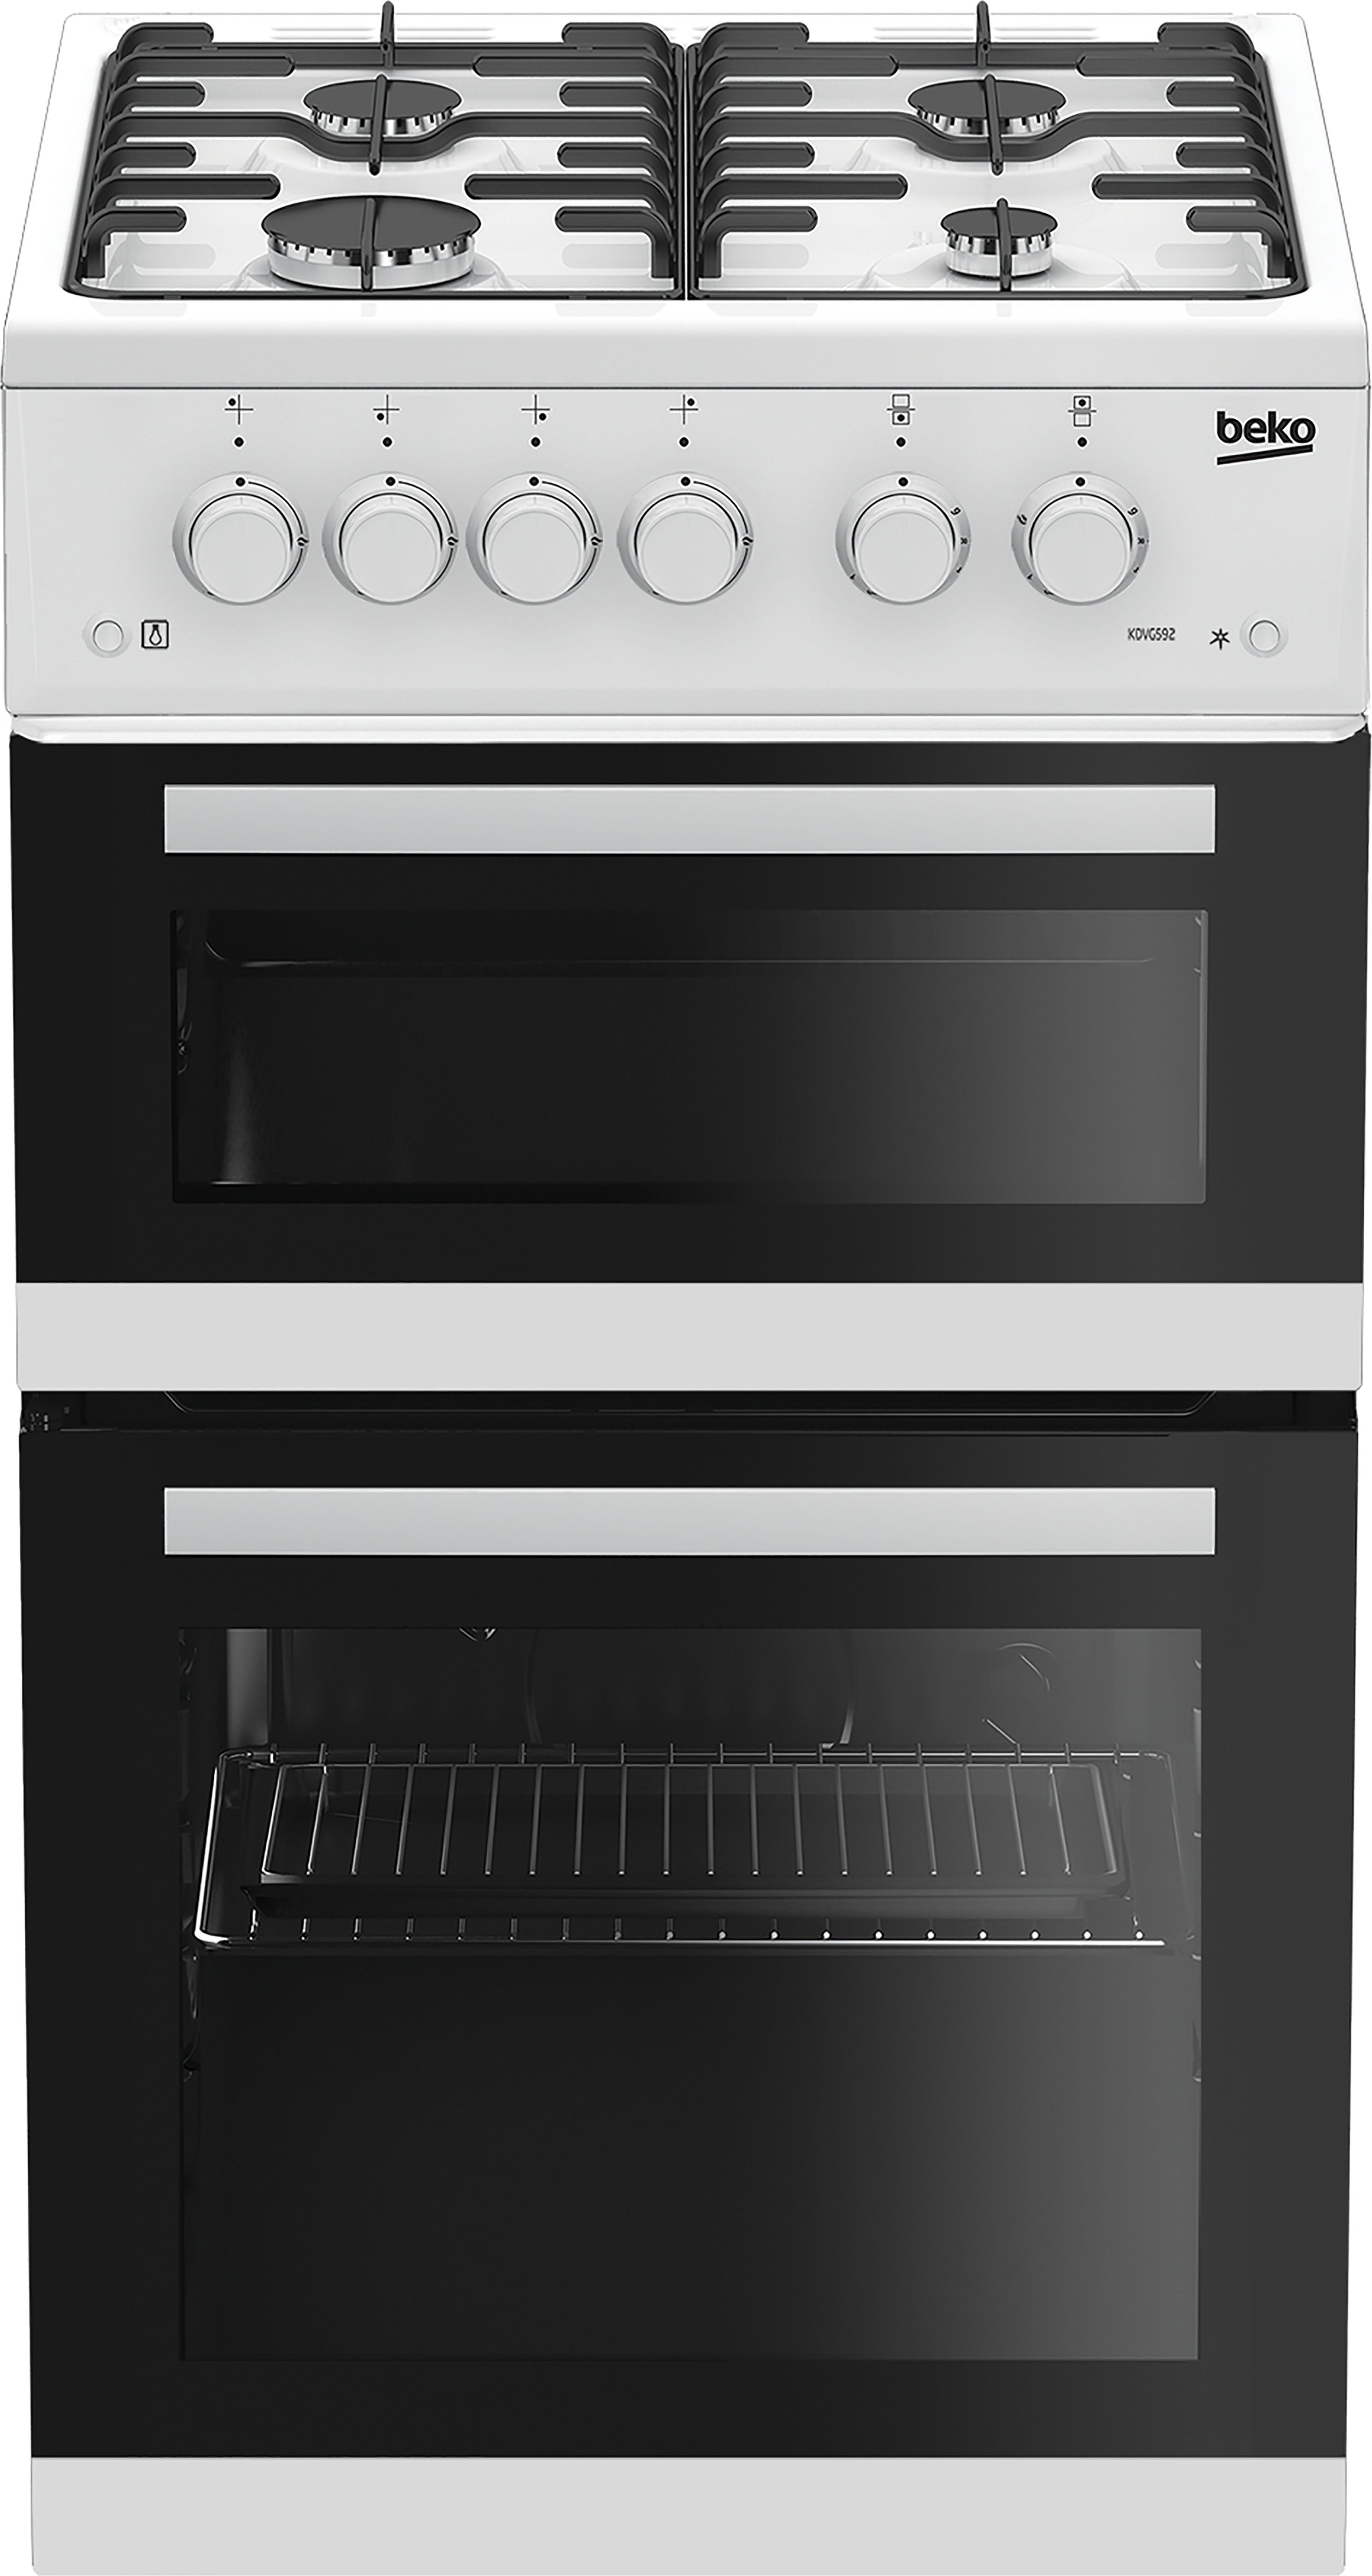 Beko KDVG593W 50cm Freestanding Gas Cooker with Gas Grill - White - A+ Rated, White